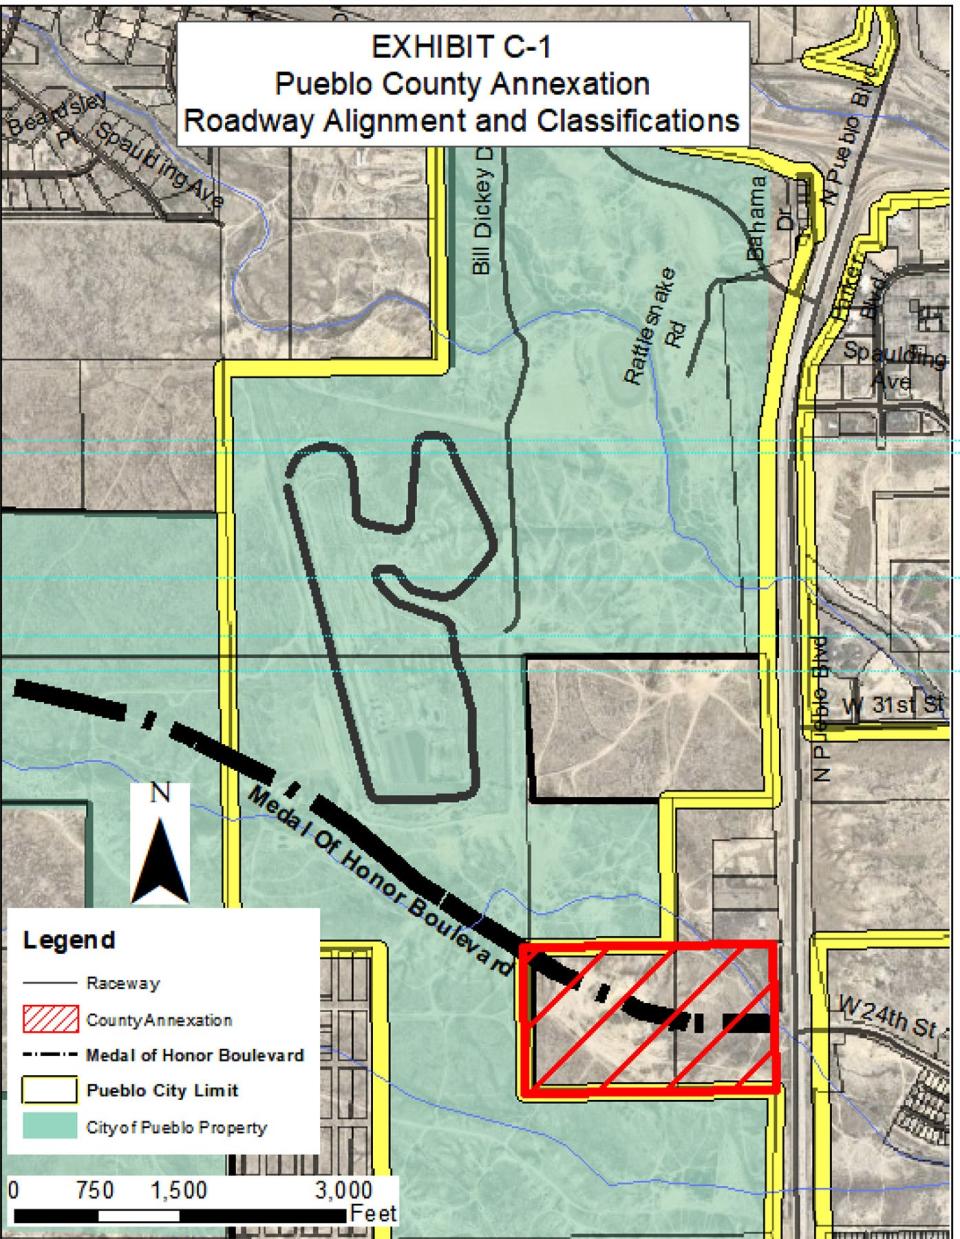 Land annexation for new Pueblo jail wins initial approval from planning